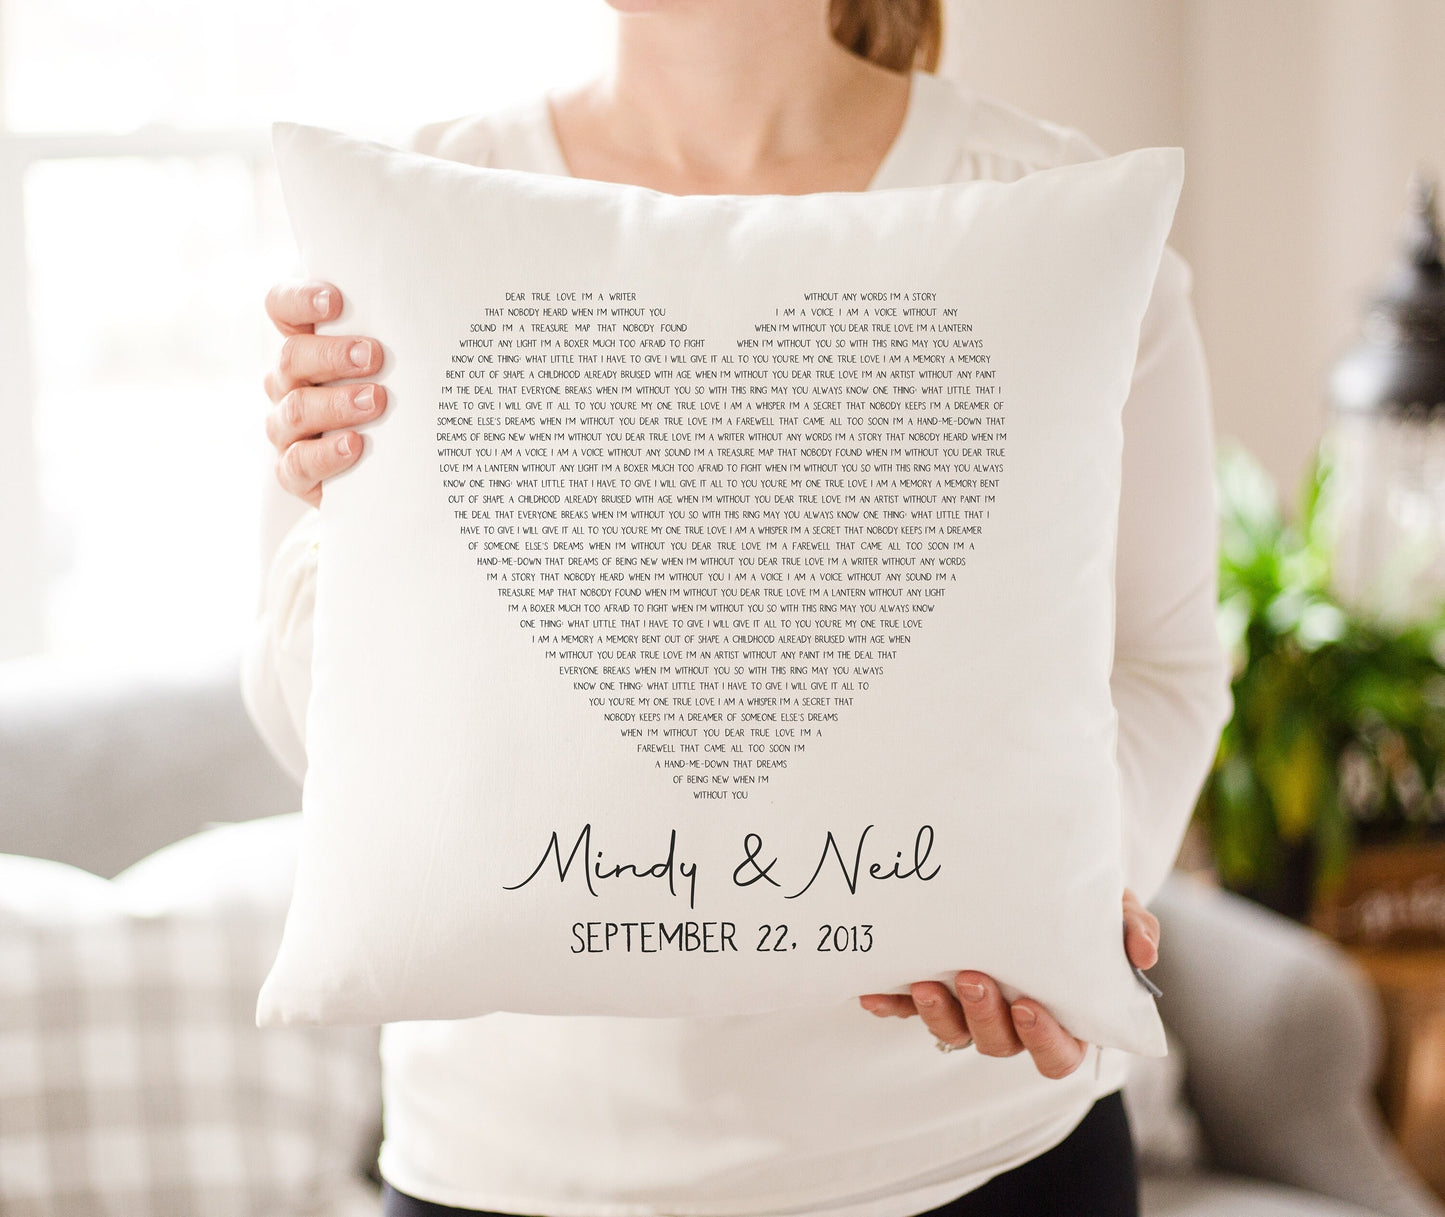 Song Lyrics Personalized Wedding Gift Anniversary Gifts for Men | Wedding Gift Husband Gift Song Lyric Art Wedding First Dance Song Lyrics